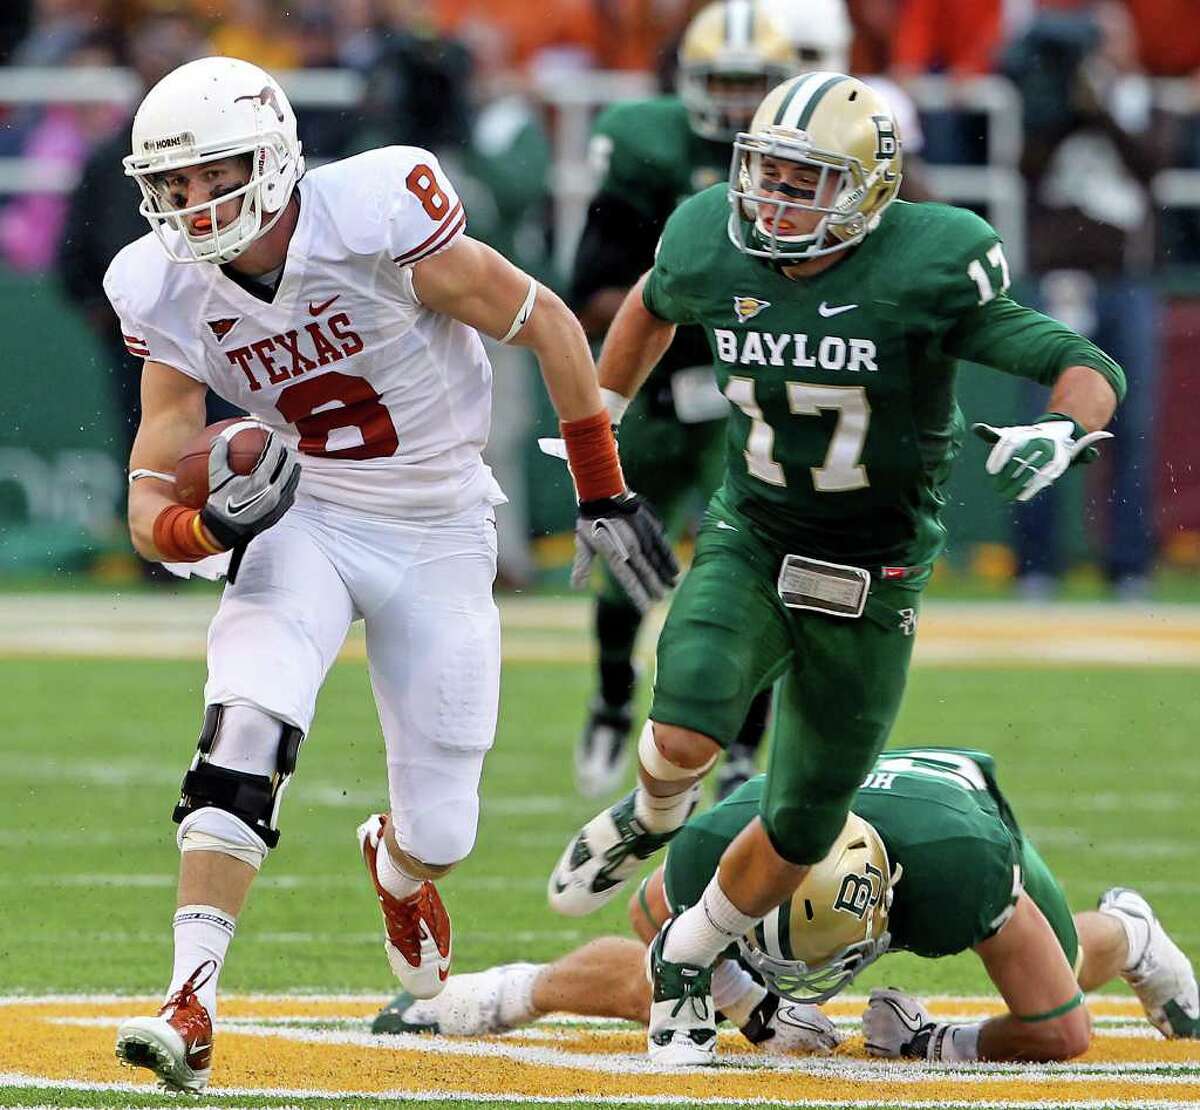 The Longhorns' Jaxon Sipley gets loose on a catch in the first half as Baylor hosts Texas at Floyd Casey Stadium in Waco on Saturday, Dec. 3, 2011.